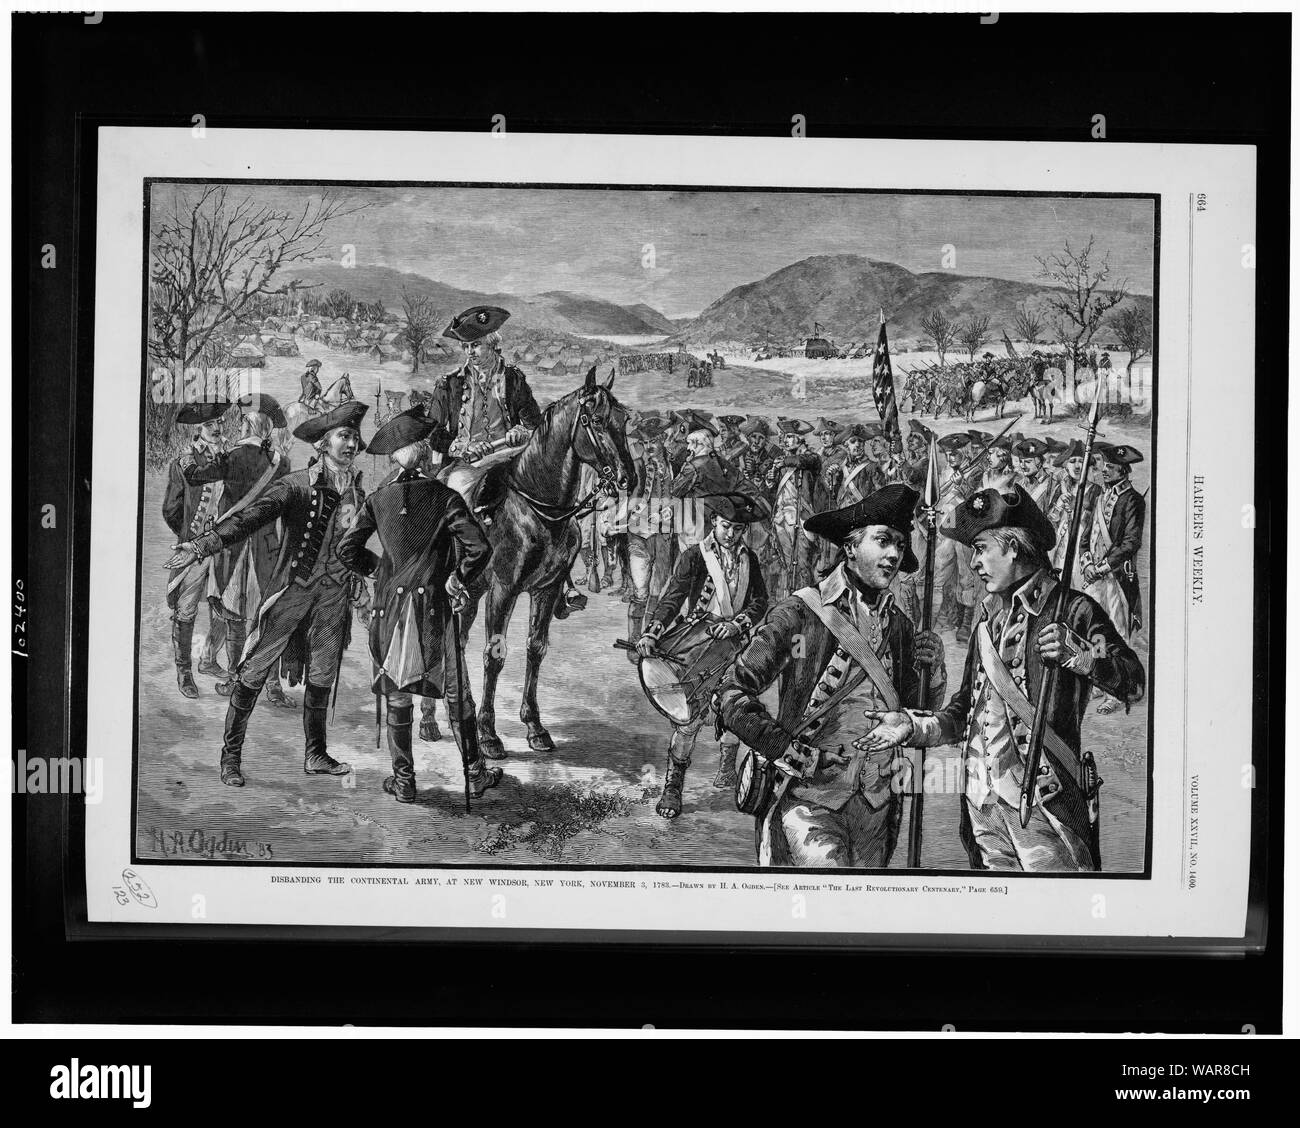 Disbanding the Continental Army, at New Windsor, New York, November 3, 1783 / drawn by H.A. Ogden. Stock Photo